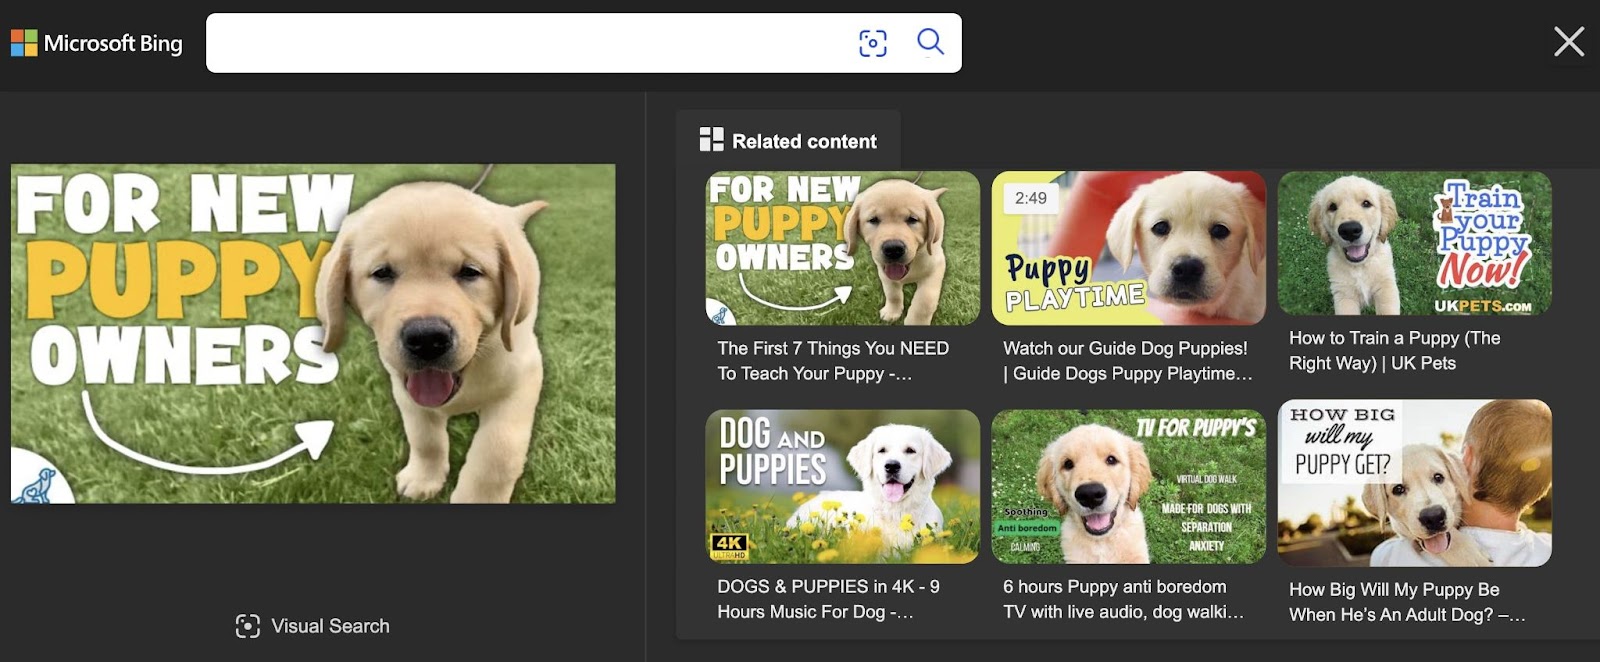 Bing video search results showing original source and related content for puppy training video